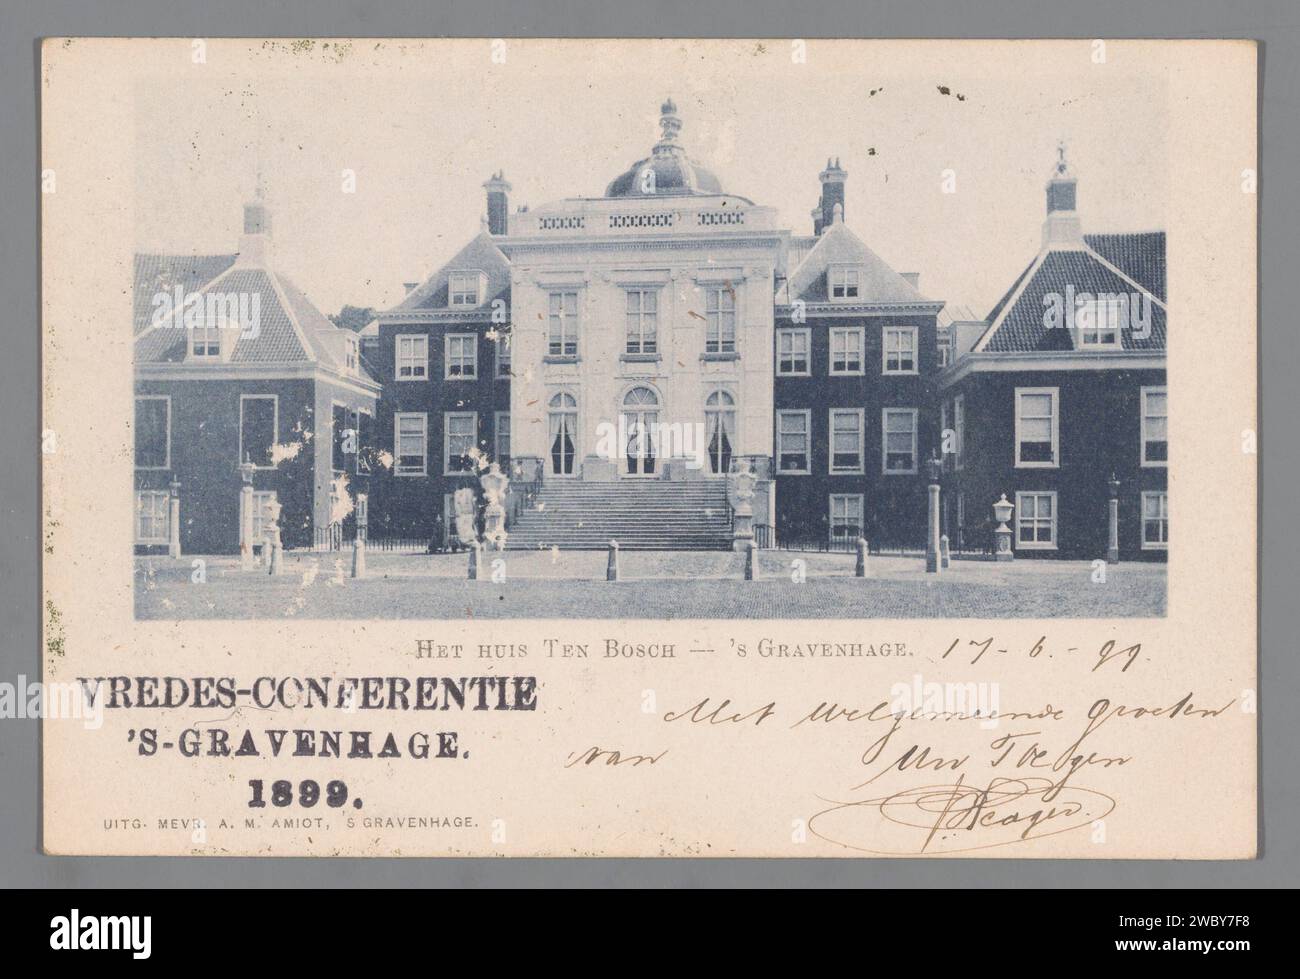 The Huis Ten Bosch - The Hague, Anonymous, A.M. Amiot, 1899 photomechanical print  The Hague cardboard collotype / writing (processes) palace Palace Huis ten Bosch Stock Photo